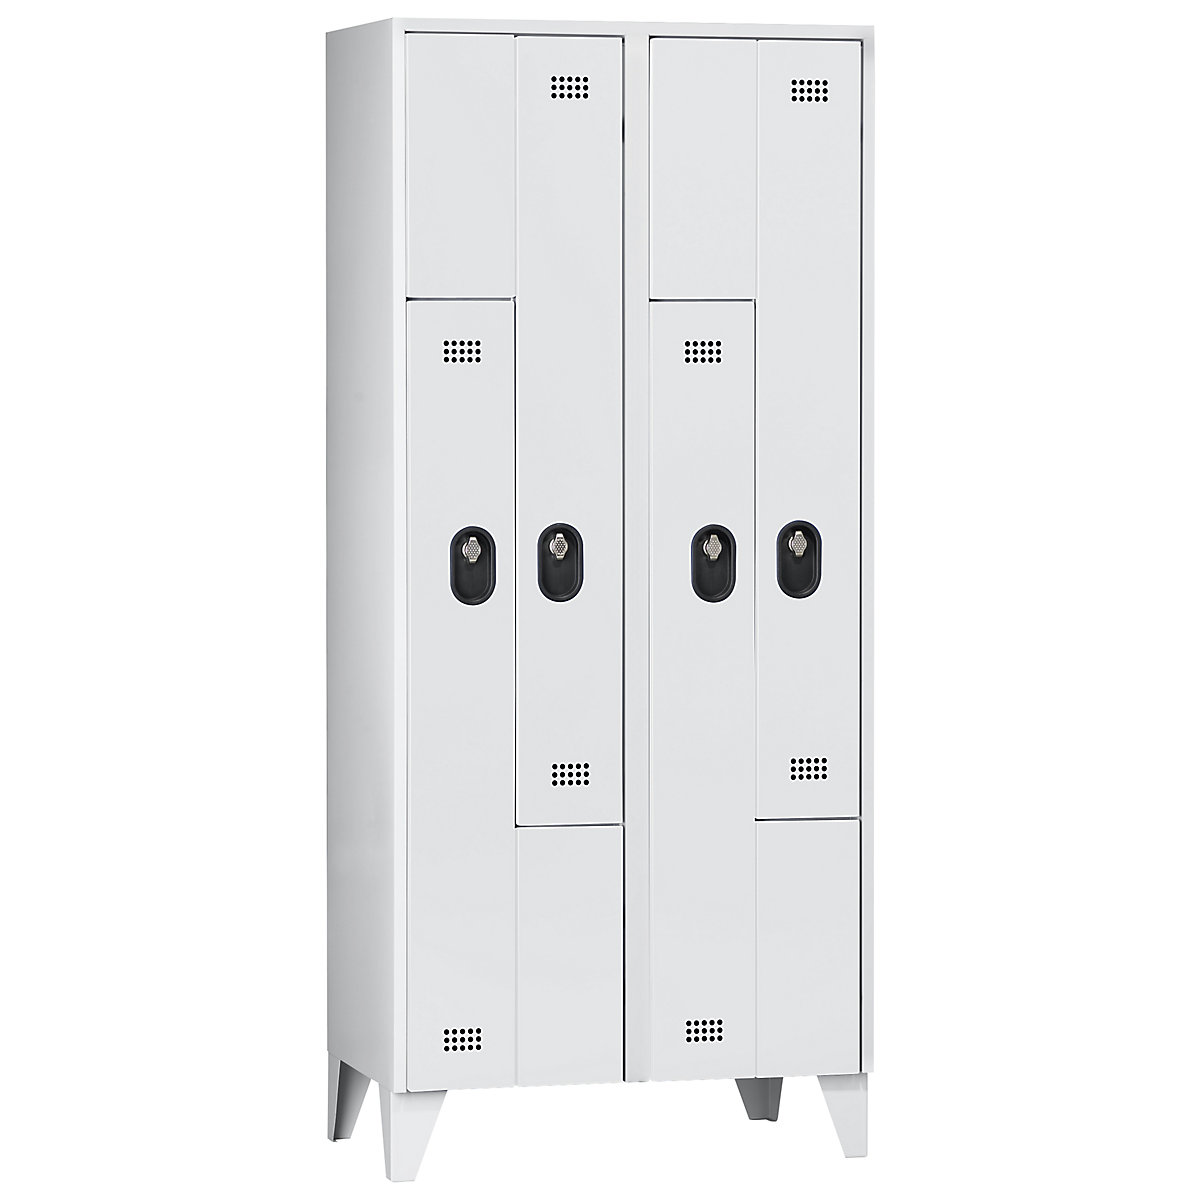 Z cloakroom cupboard, compartment height 820 mm - Wolf